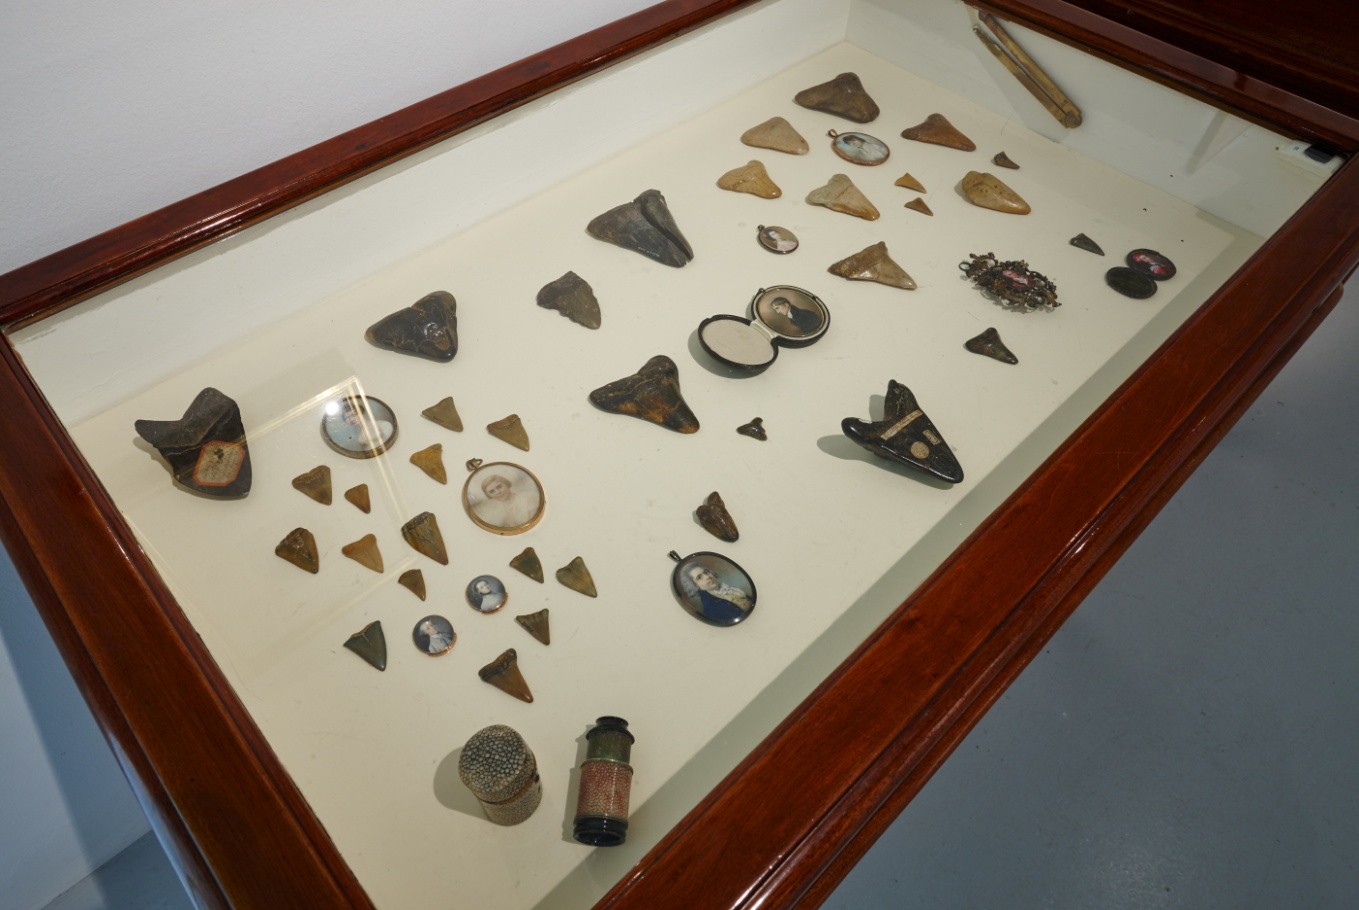 A selection of Fossil shark teeth (NMI) placed alongside a selection of miniatures (NGI) and a Spy glass (NMI) Denis Mortell Photography